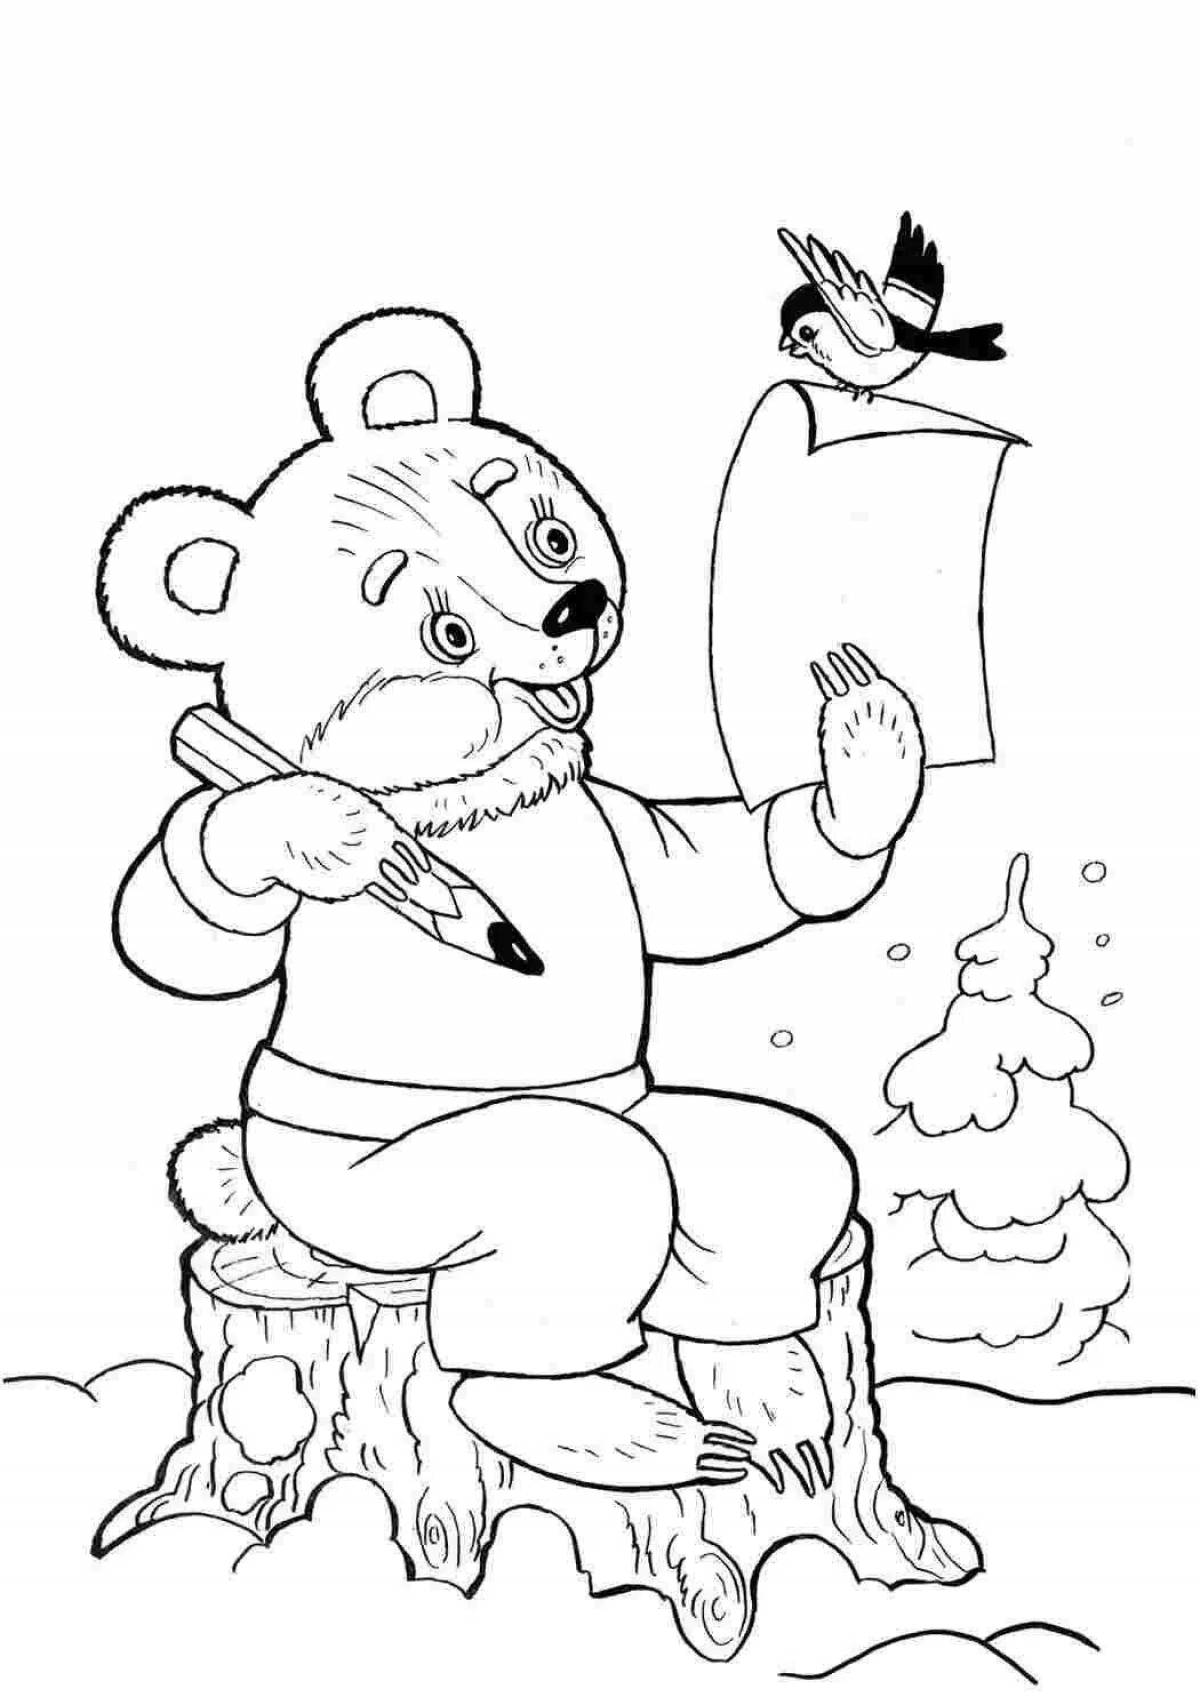 Magic bear and hare coloring page